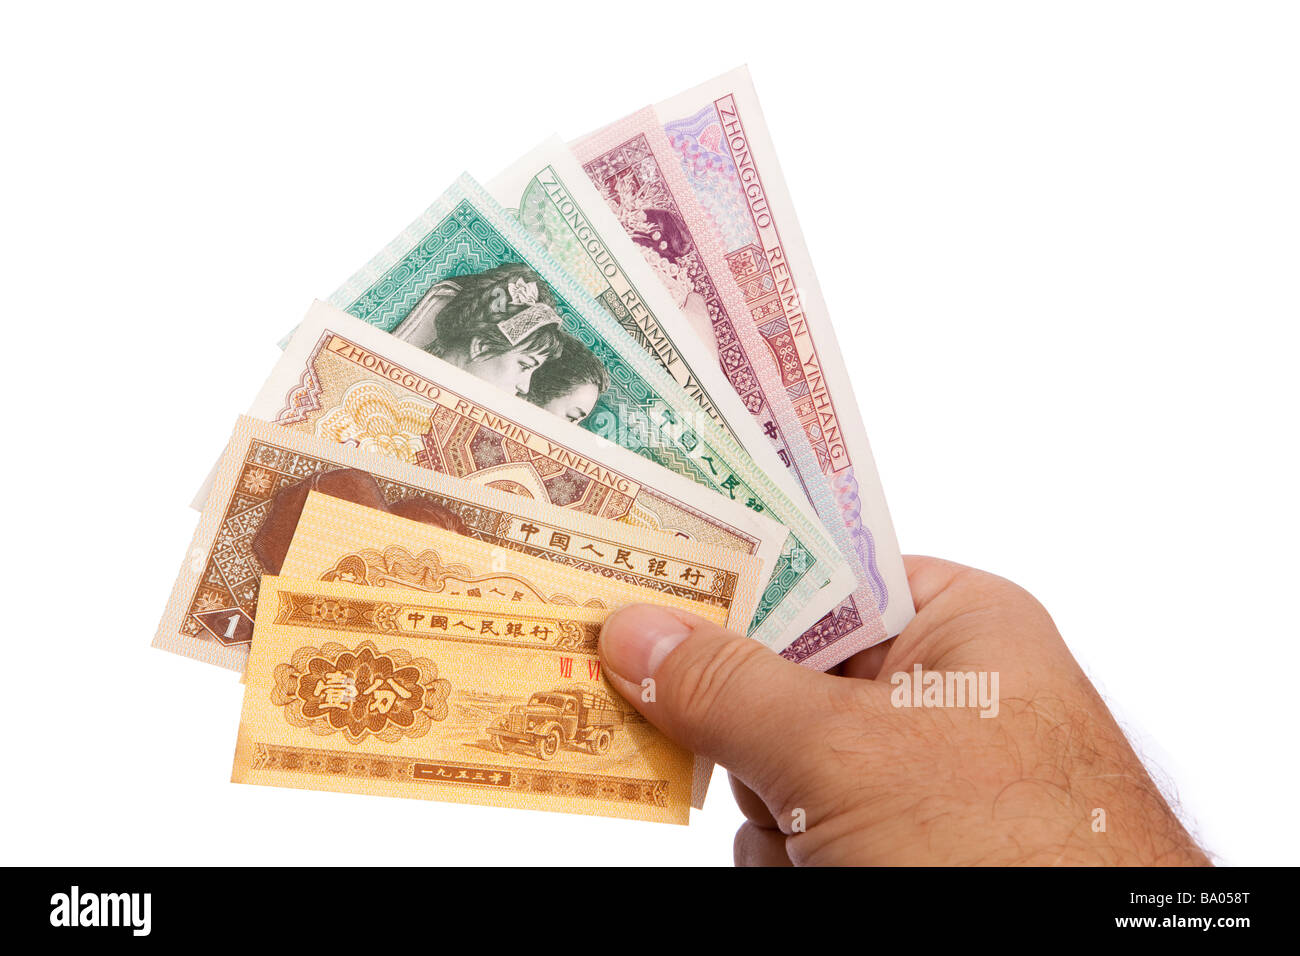 Money male hand holding handful of old Chinese currency Stock Photo